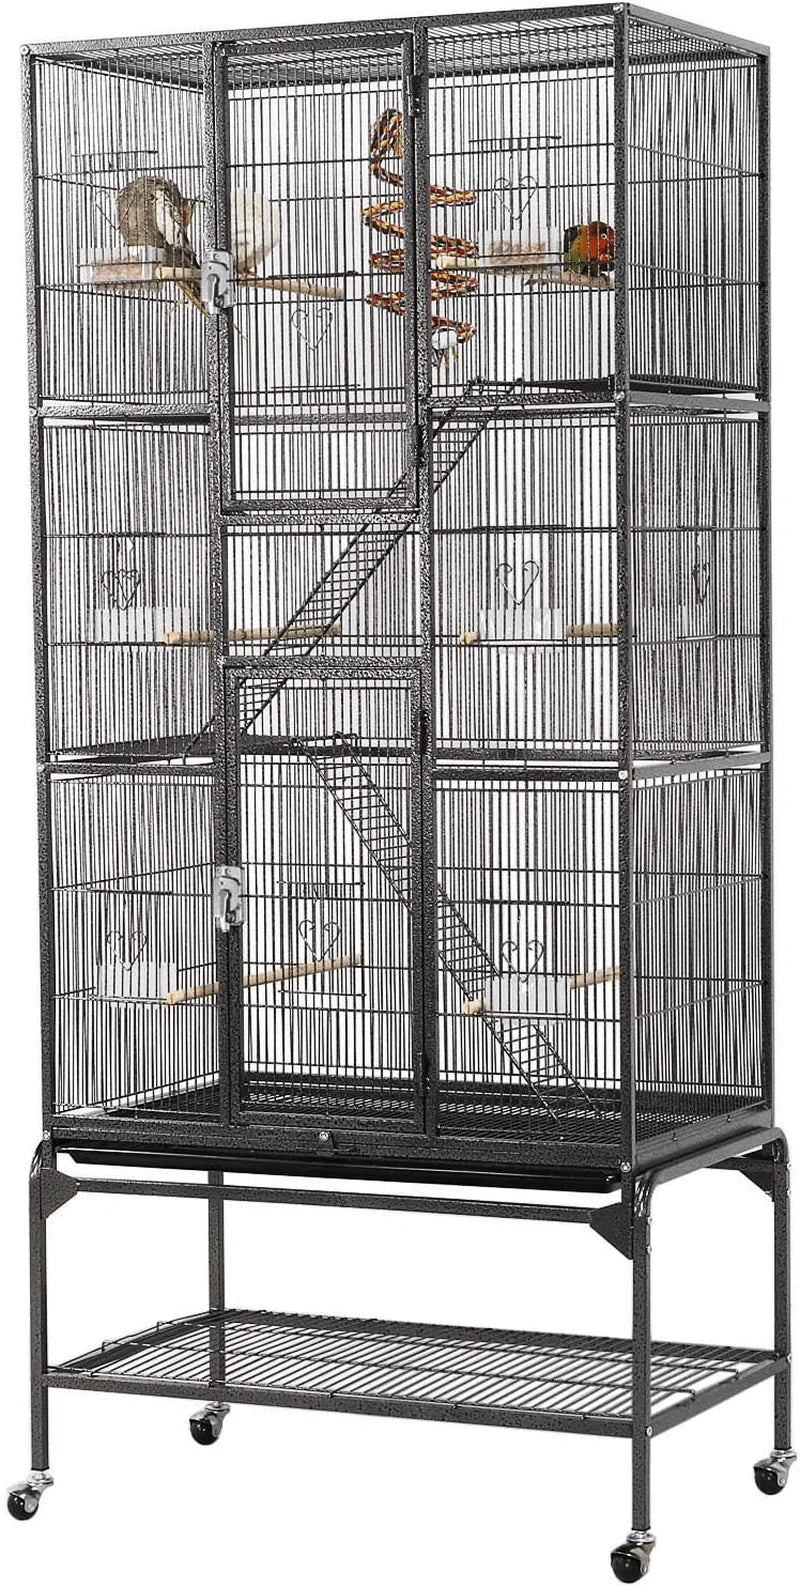 Yaheetech 69In Extra Large Bird Cage Metal Parrot Cage for Mid-Sized Parrots Cockatiels Conures Parakeets Lovebirds Budgie Finch Animals & Pet Supplies > Pet Supplies > Bird Supplies > Bird Cages & Stands Yaheetech Black  